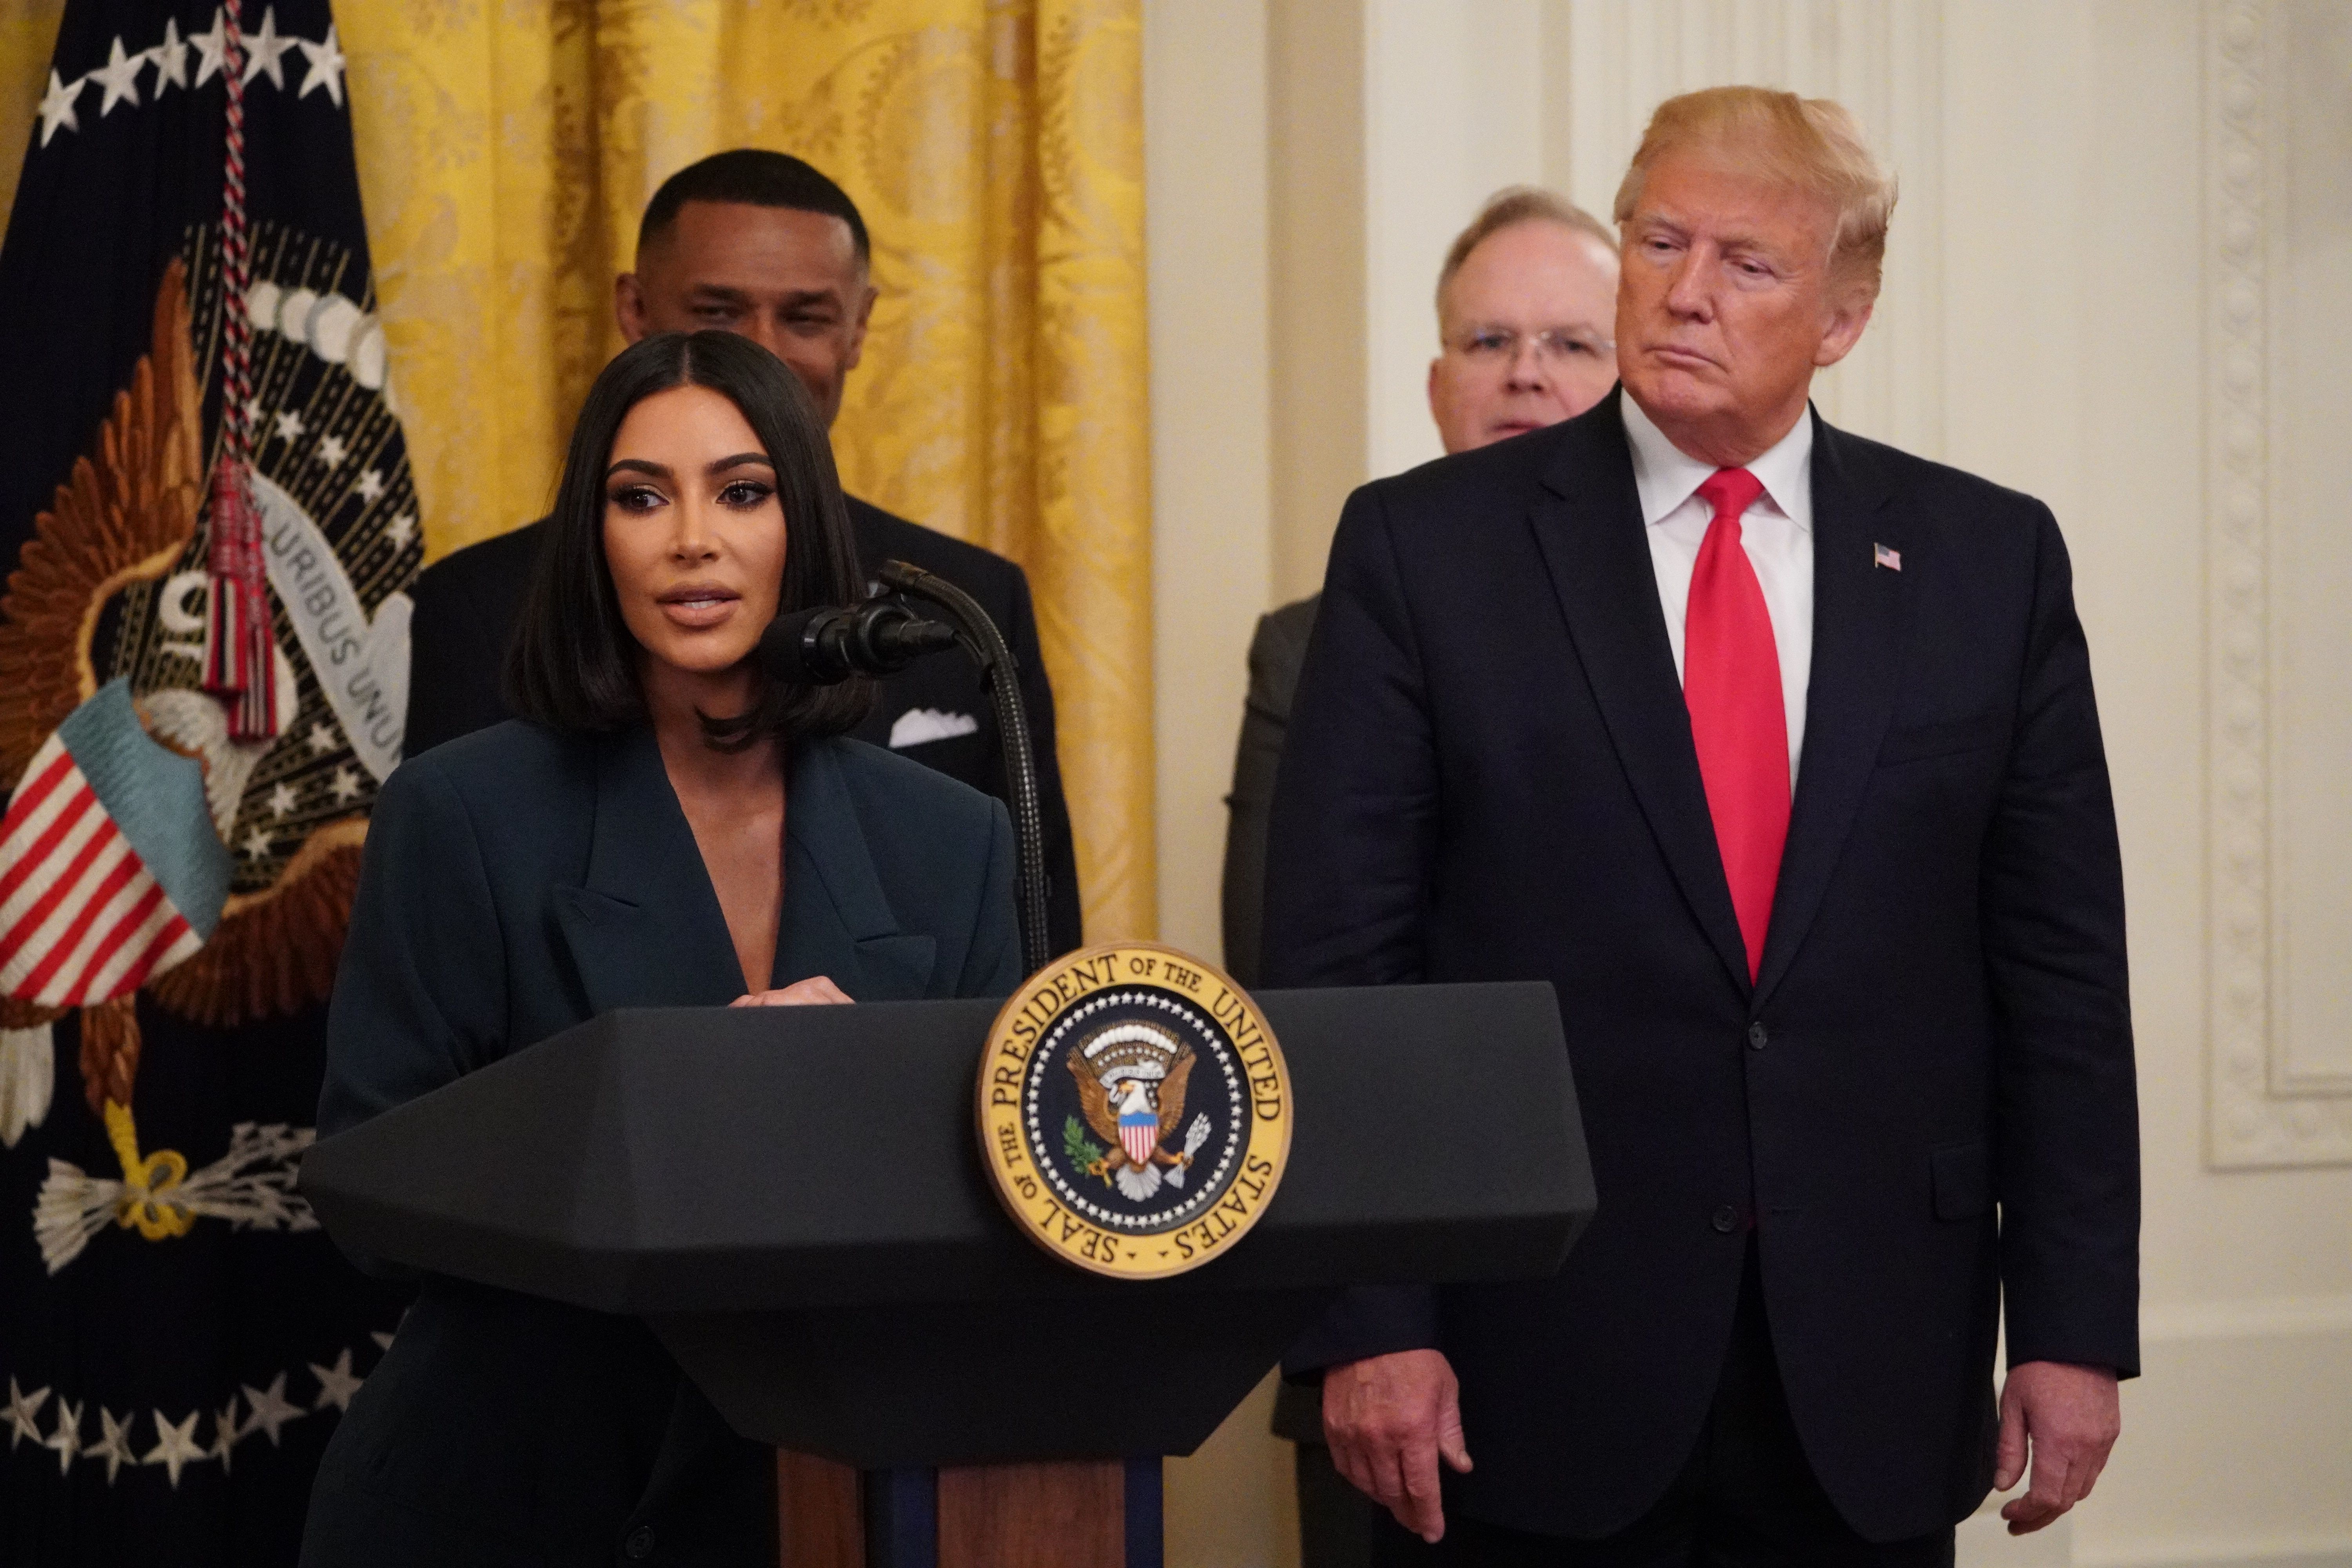 Kim Kardashian speaks as US President Donald Trump holds an event on second chance hiring and criminal justice reform in the East Room of the White House in Washington, DC, June 13, 2019. (Photo credit MANDEL NGAN/AFP/Getty Images)